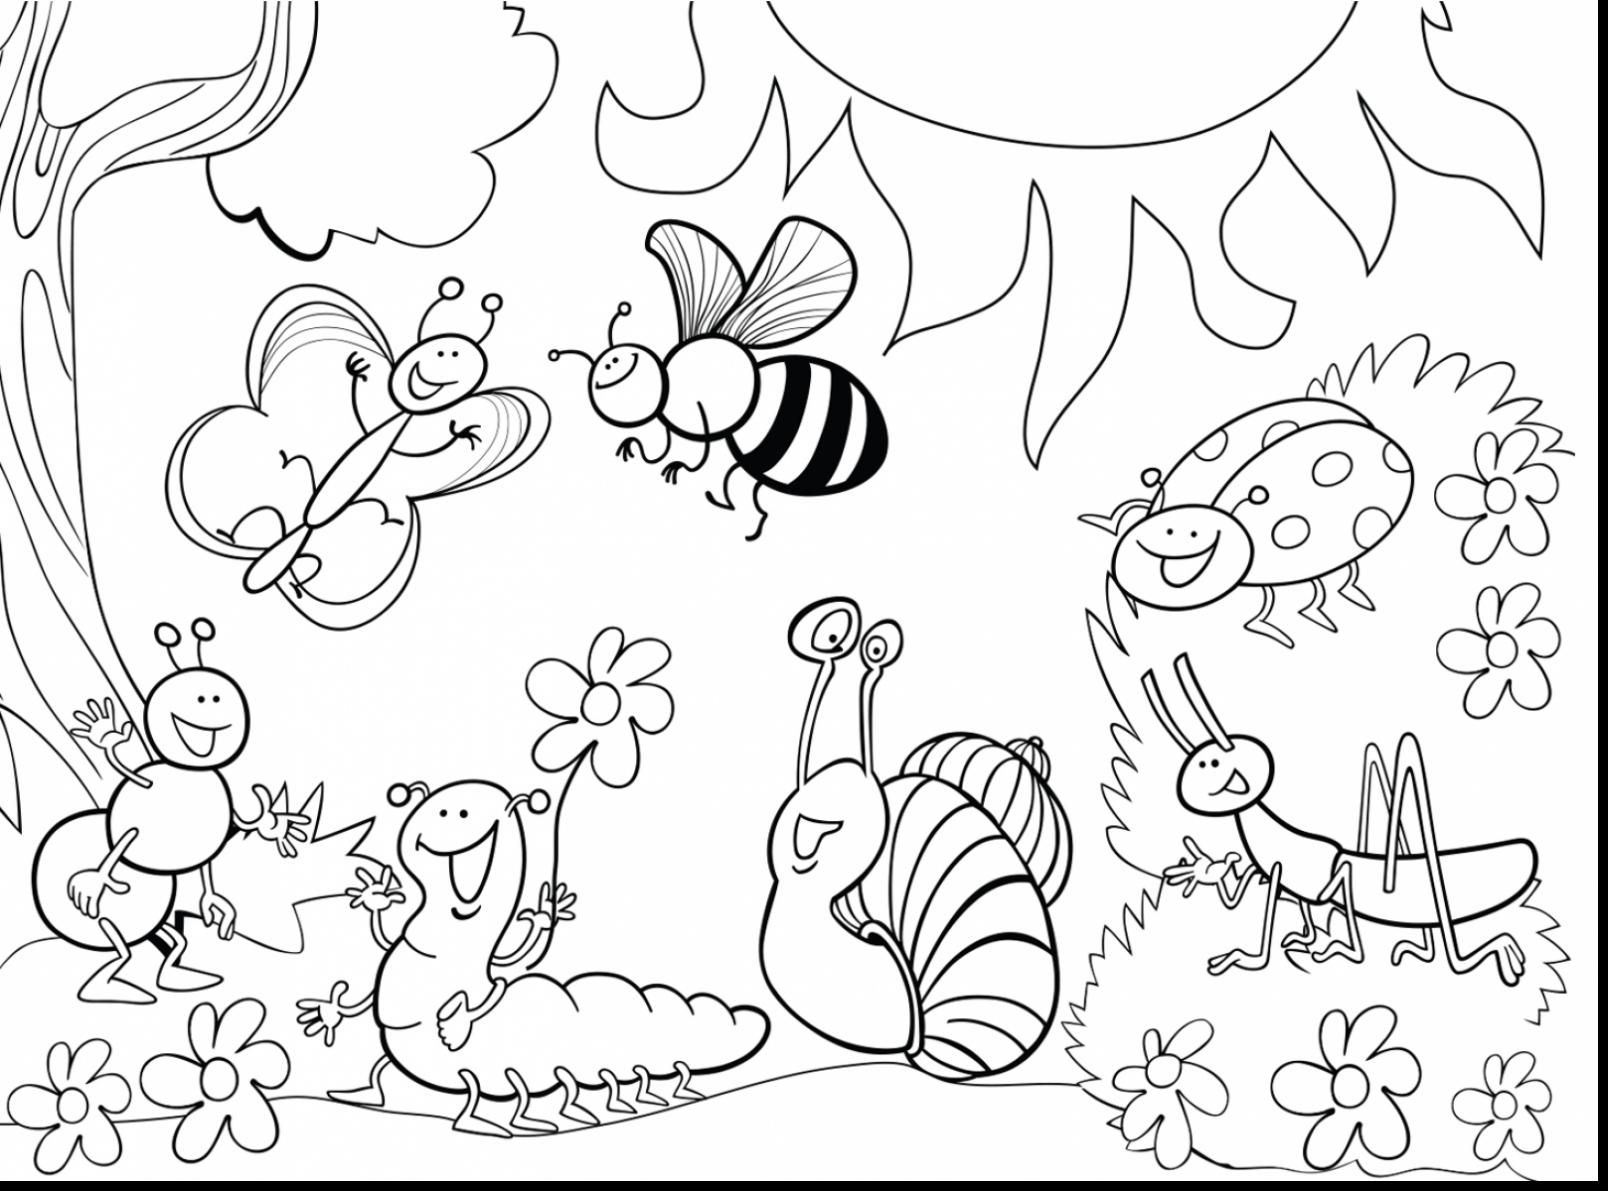 Bug Coloring Pages For Kids Coloring Free Insect Coloring Sheets Bug Pages For Kids Animals